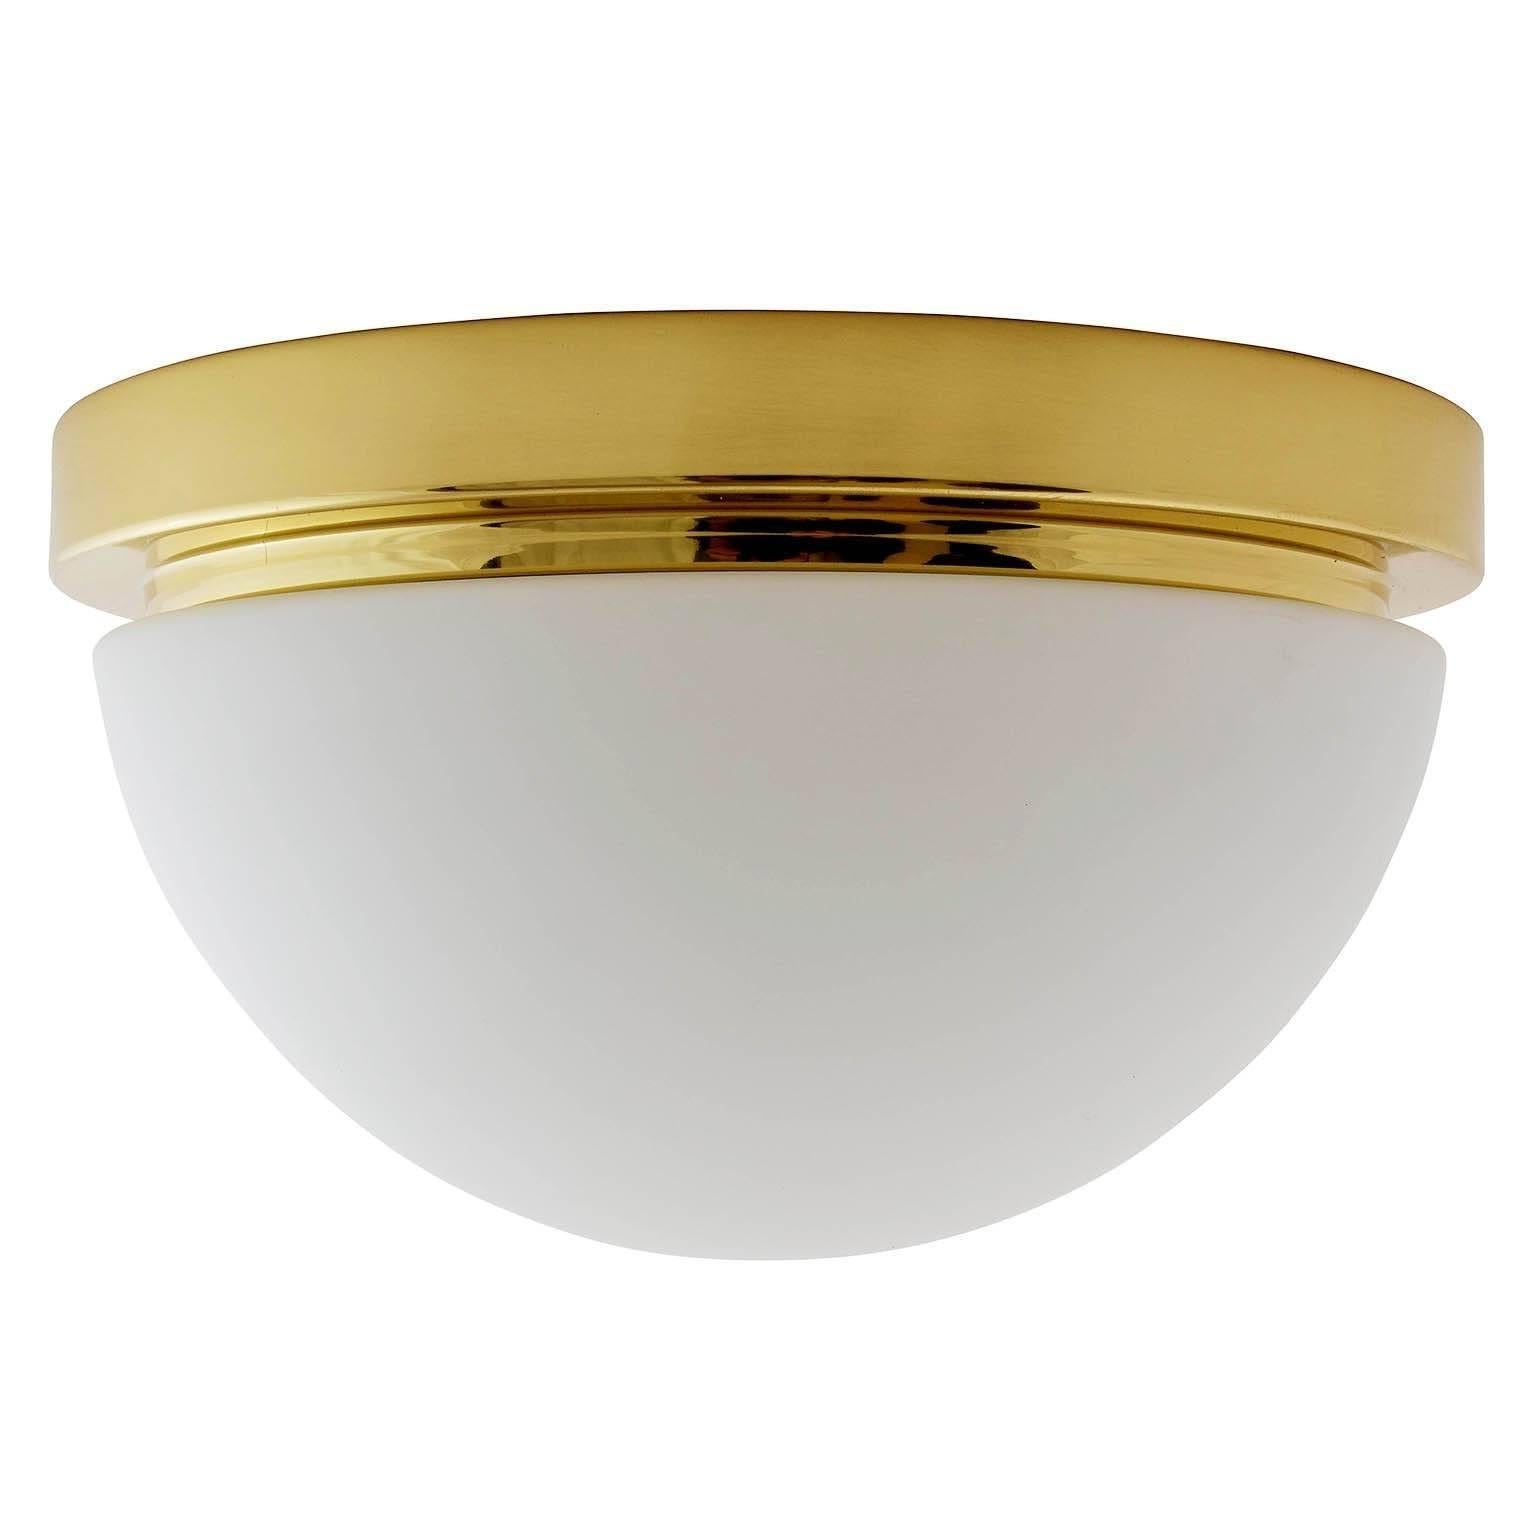 One of eight flush mount or wall lights by Glashütte Limburg, manufactured in midcentury, circa 1970.
They are made of a polished brass armature with a dome shaped white milk glass lampshade. Labelled with Glashütte Limburg.
The price is per light.